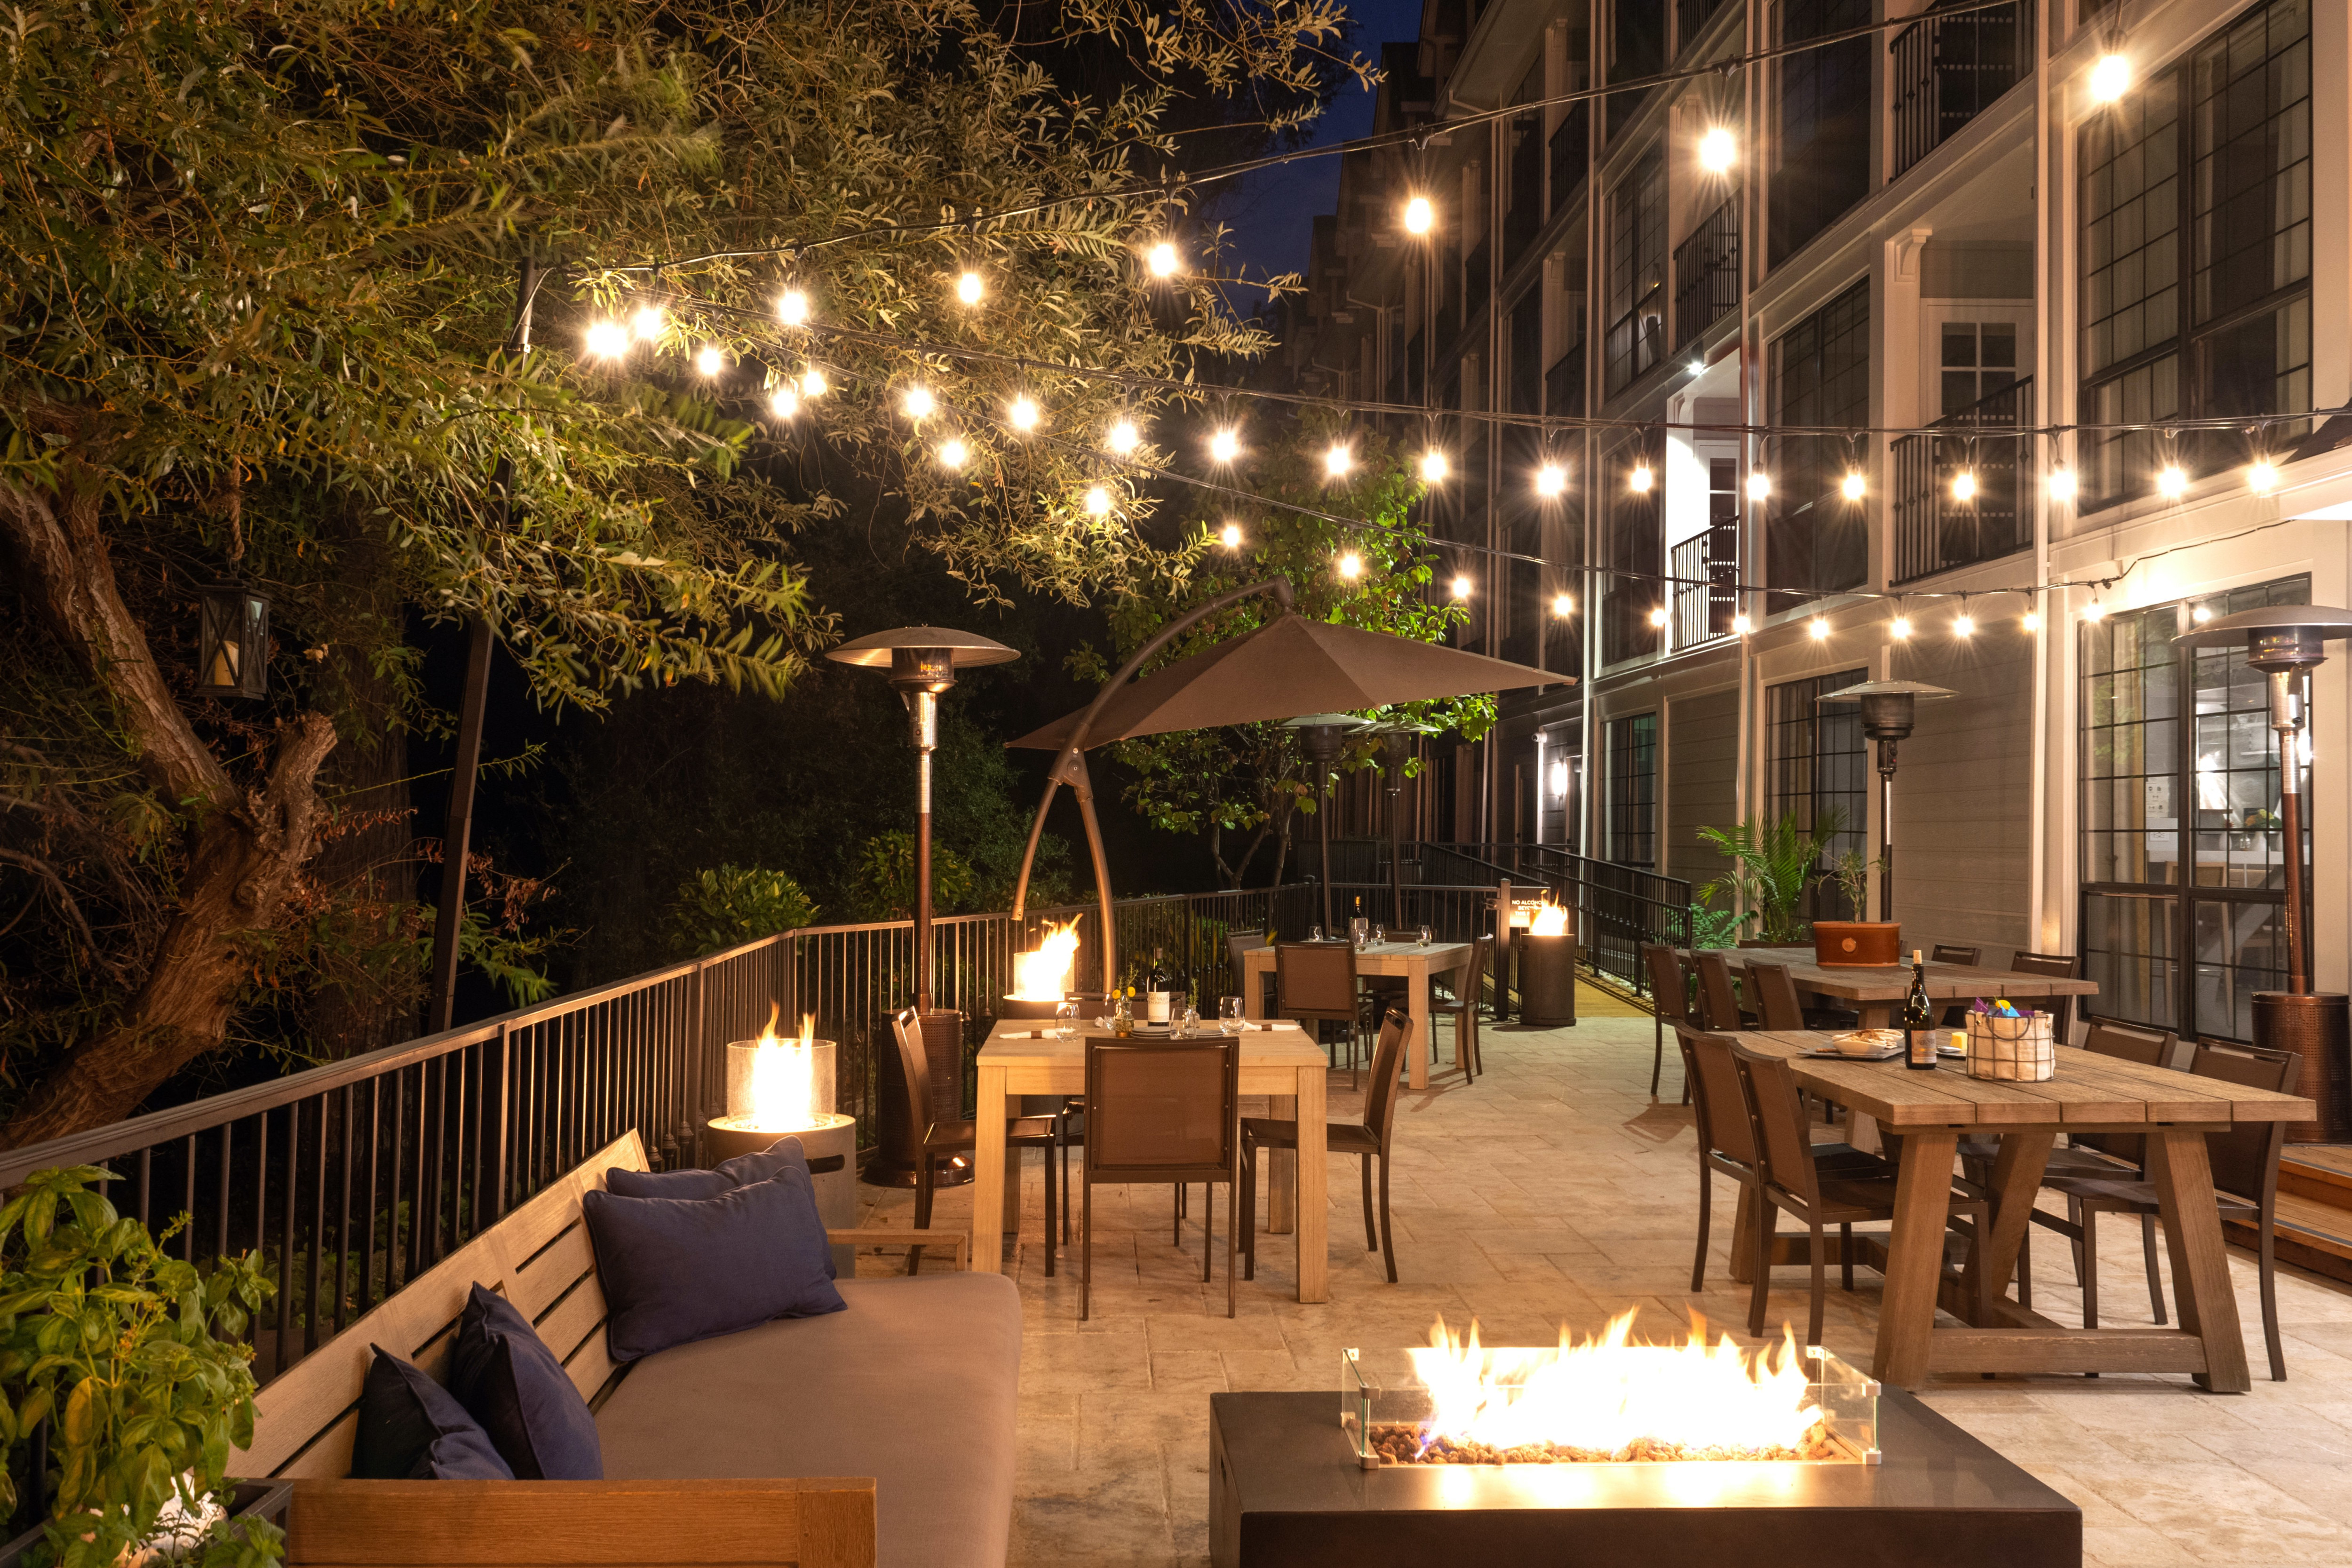 Outdoor Bar Patio at Night with Fire Pit